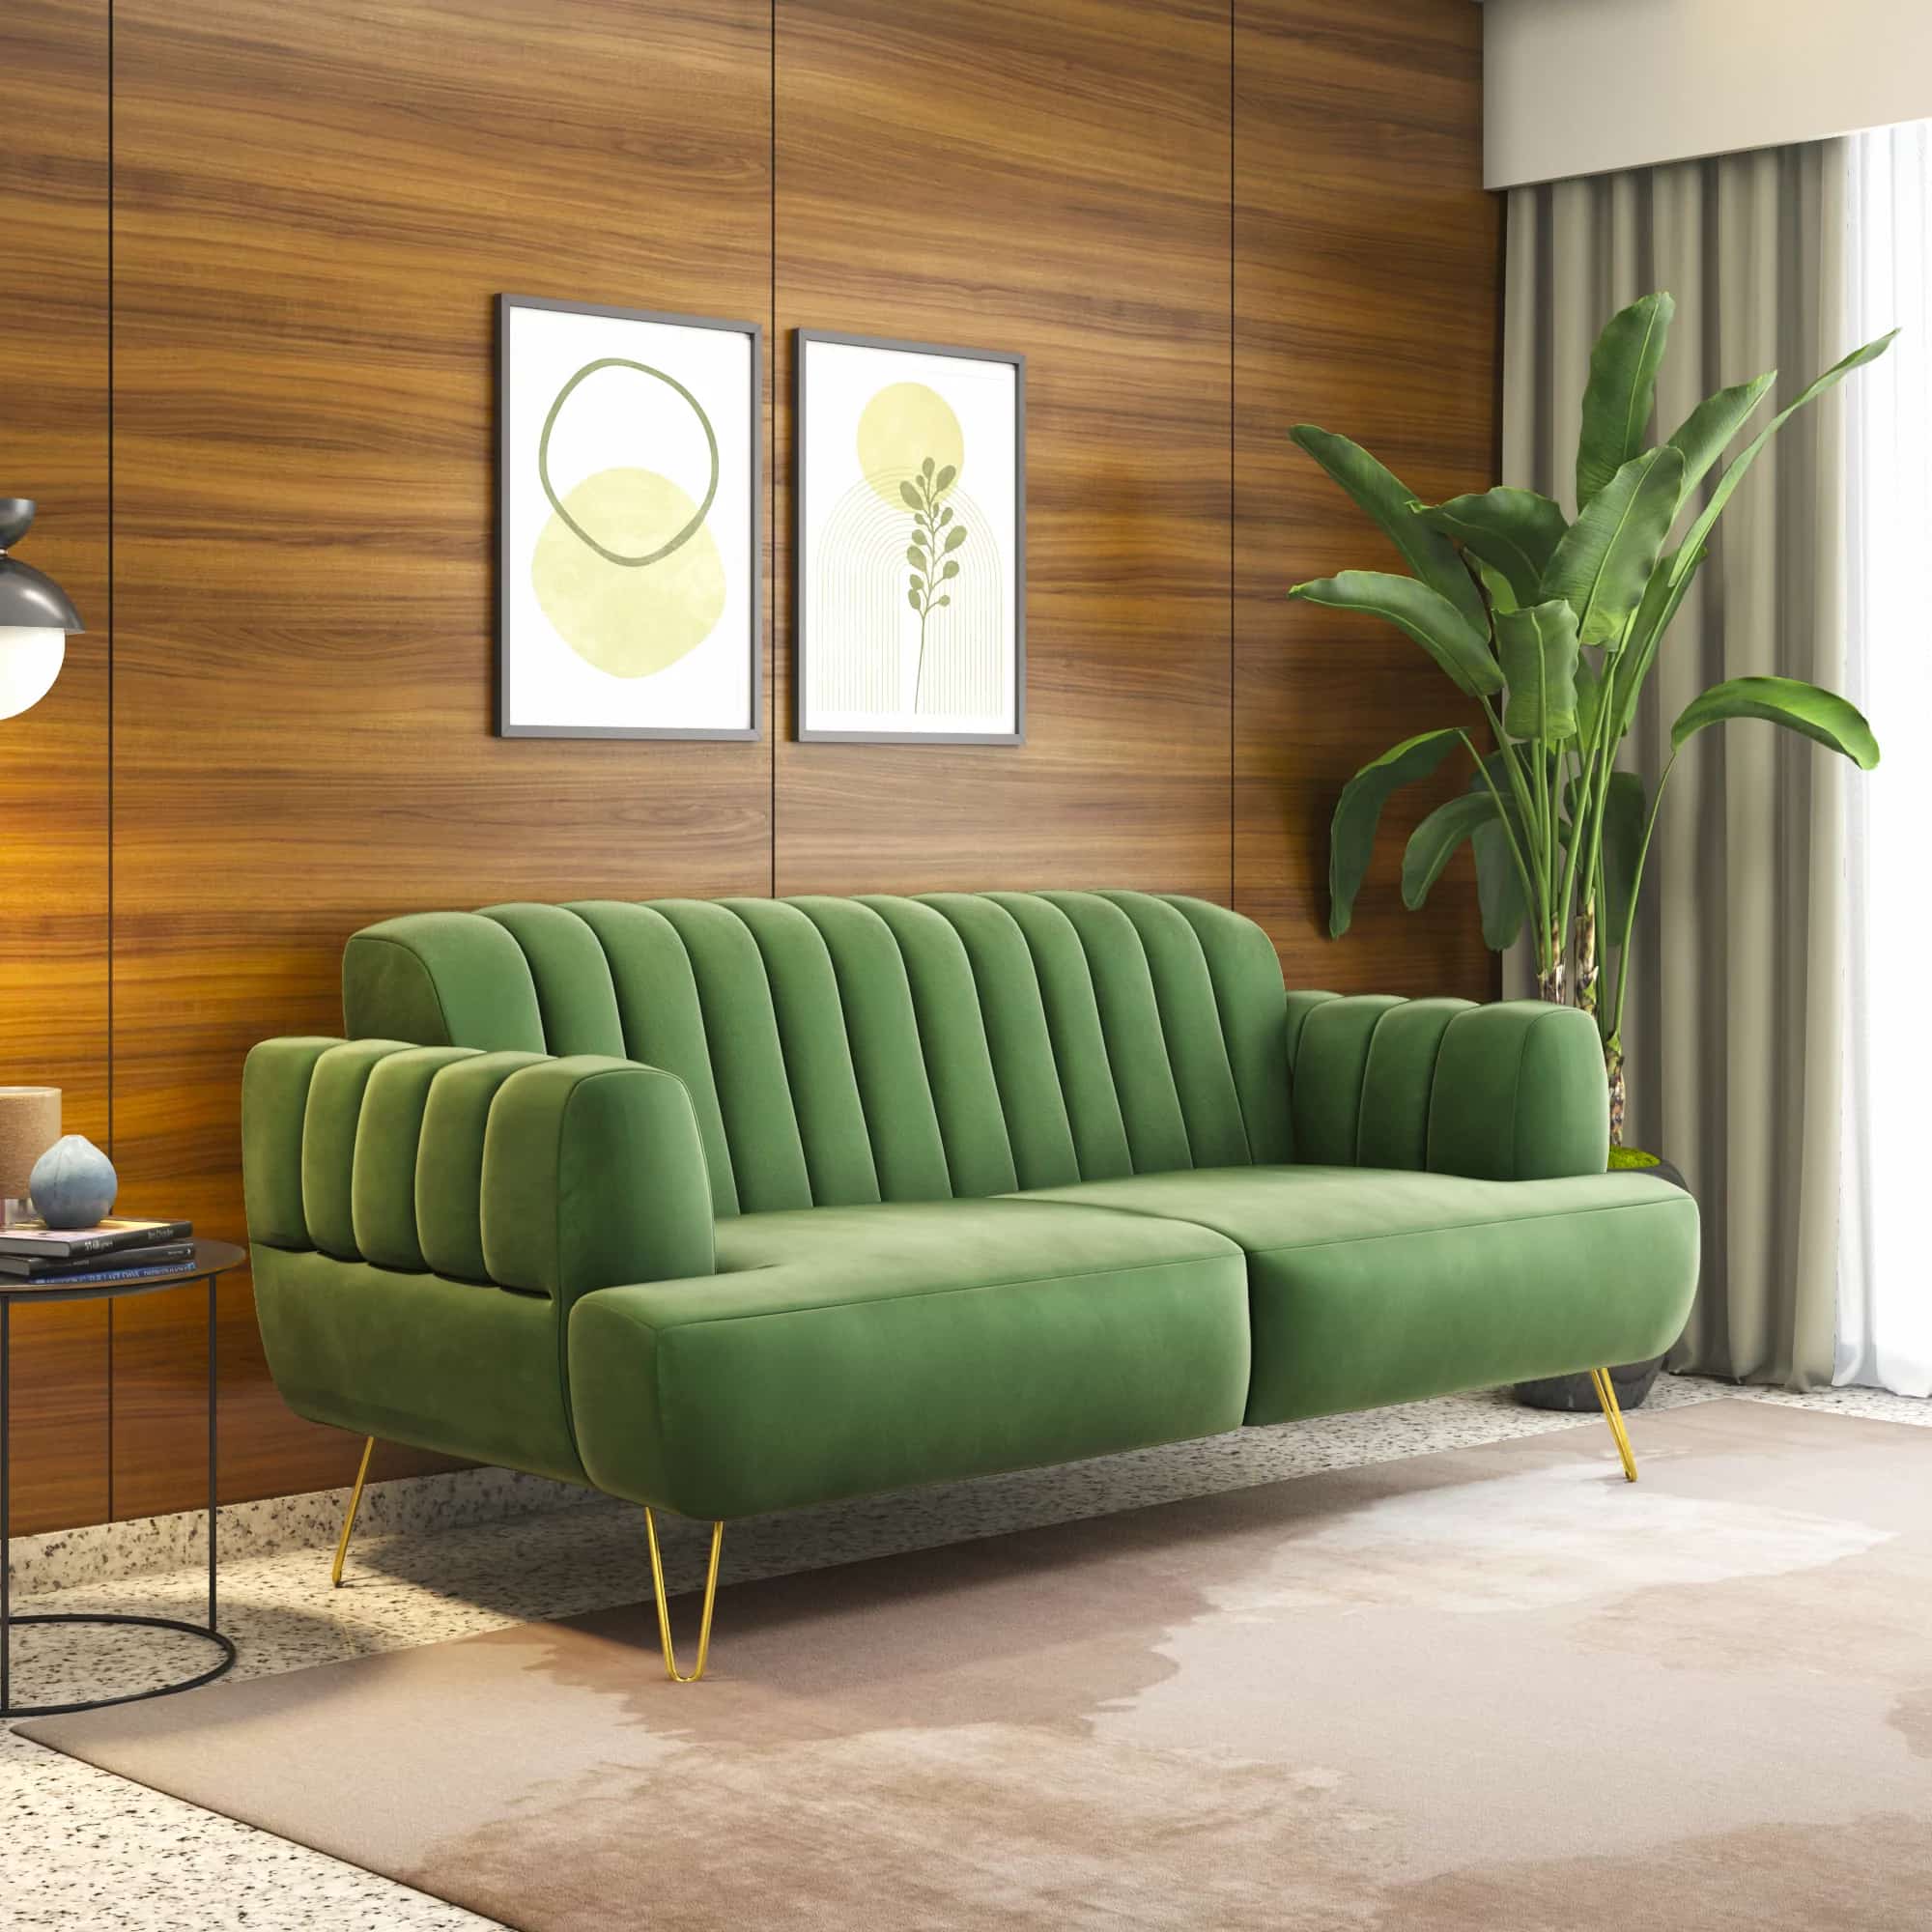 green coloured tufted couch with elegant armrest, brown coloured rug placed under it, indoor plant placed in the room, side table, minimal room decor with latest designer sofa sets